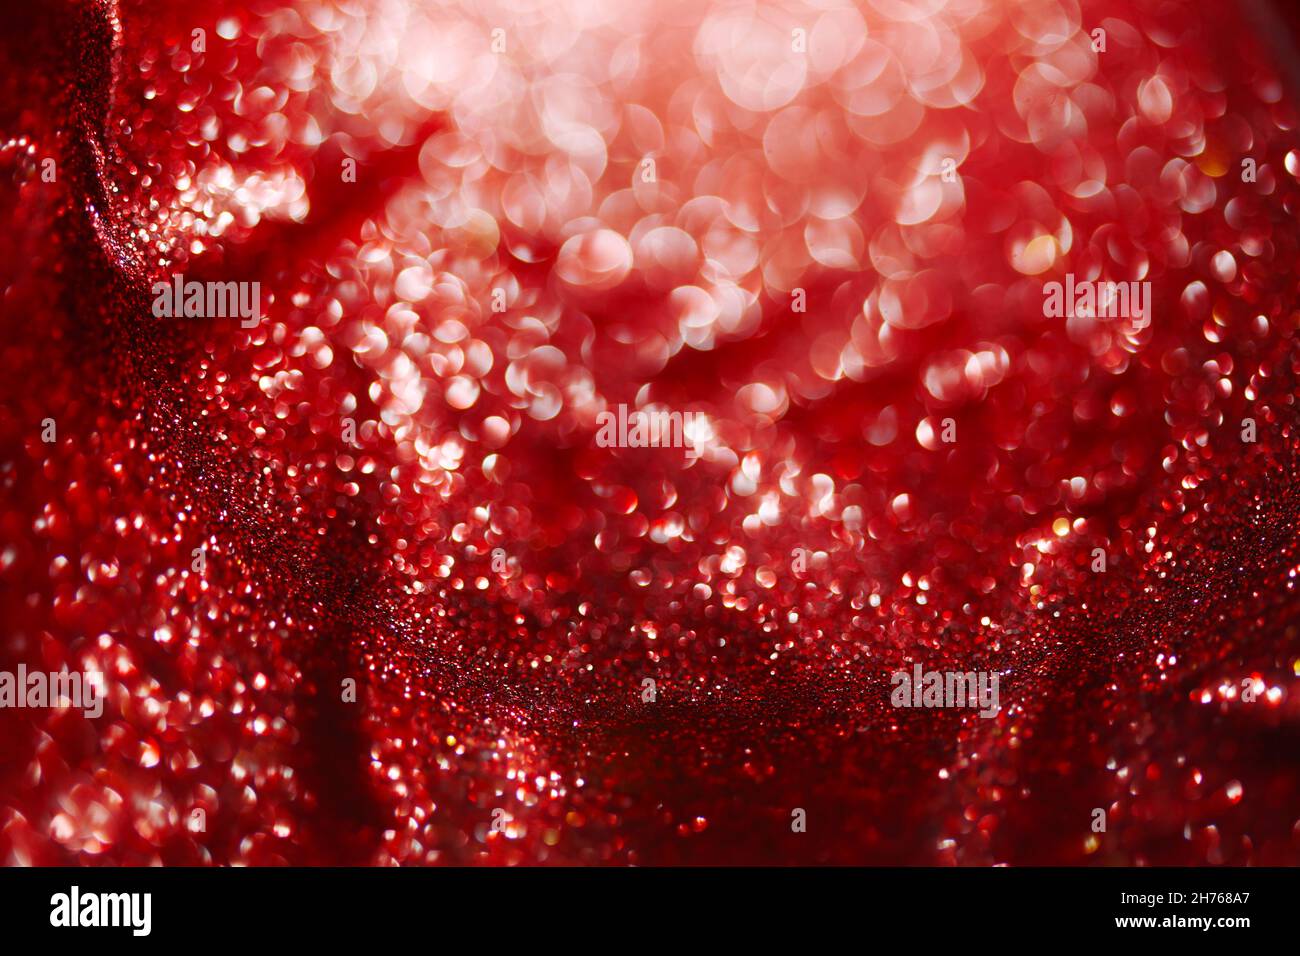 Abstract red glitter background Stock Photo